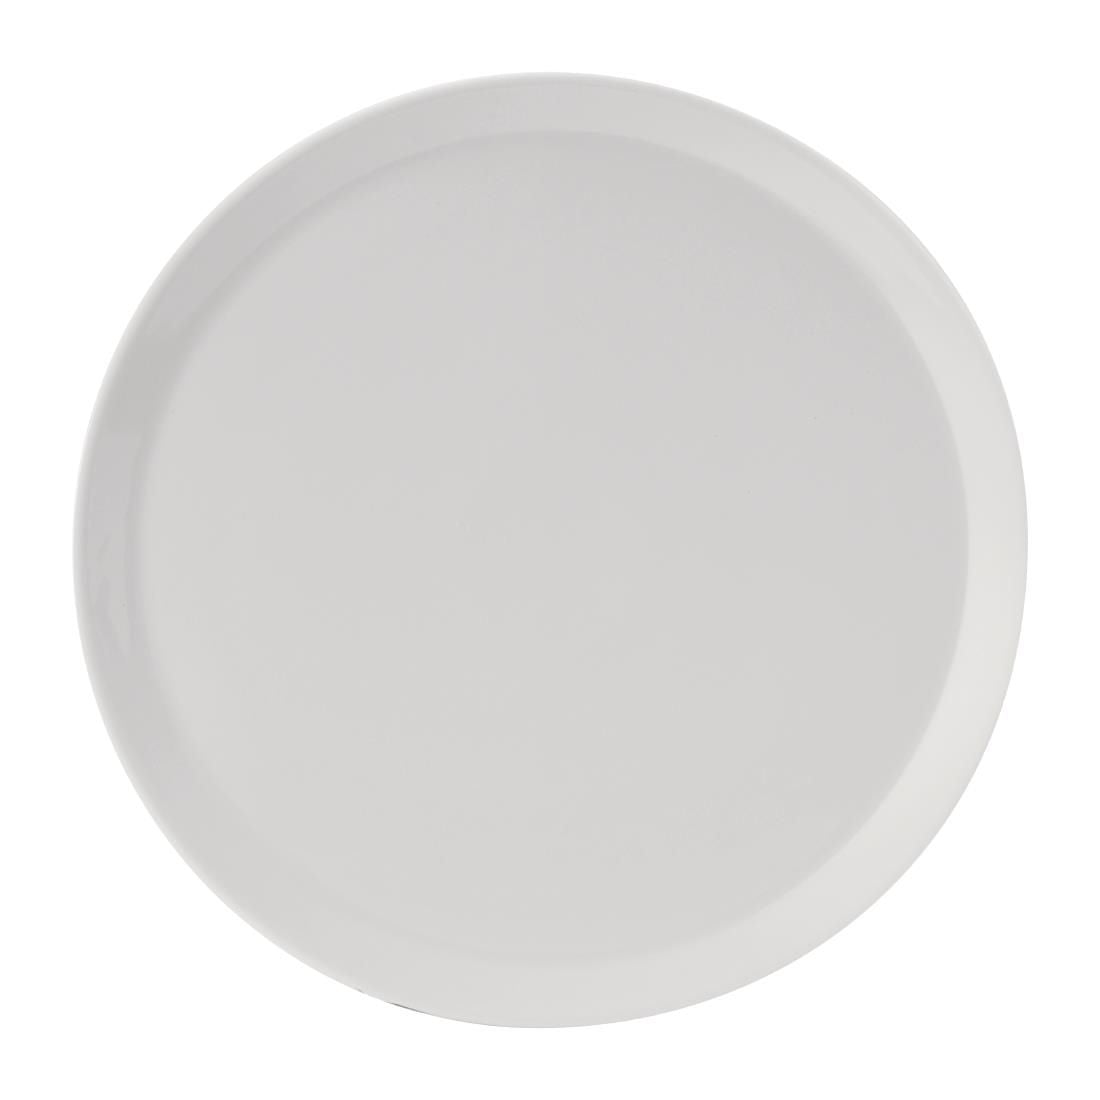 DB627 Utopia Titan Pizza Plates White 320mm (Pack of 6) JD Catering Equipment Solutions Ltd